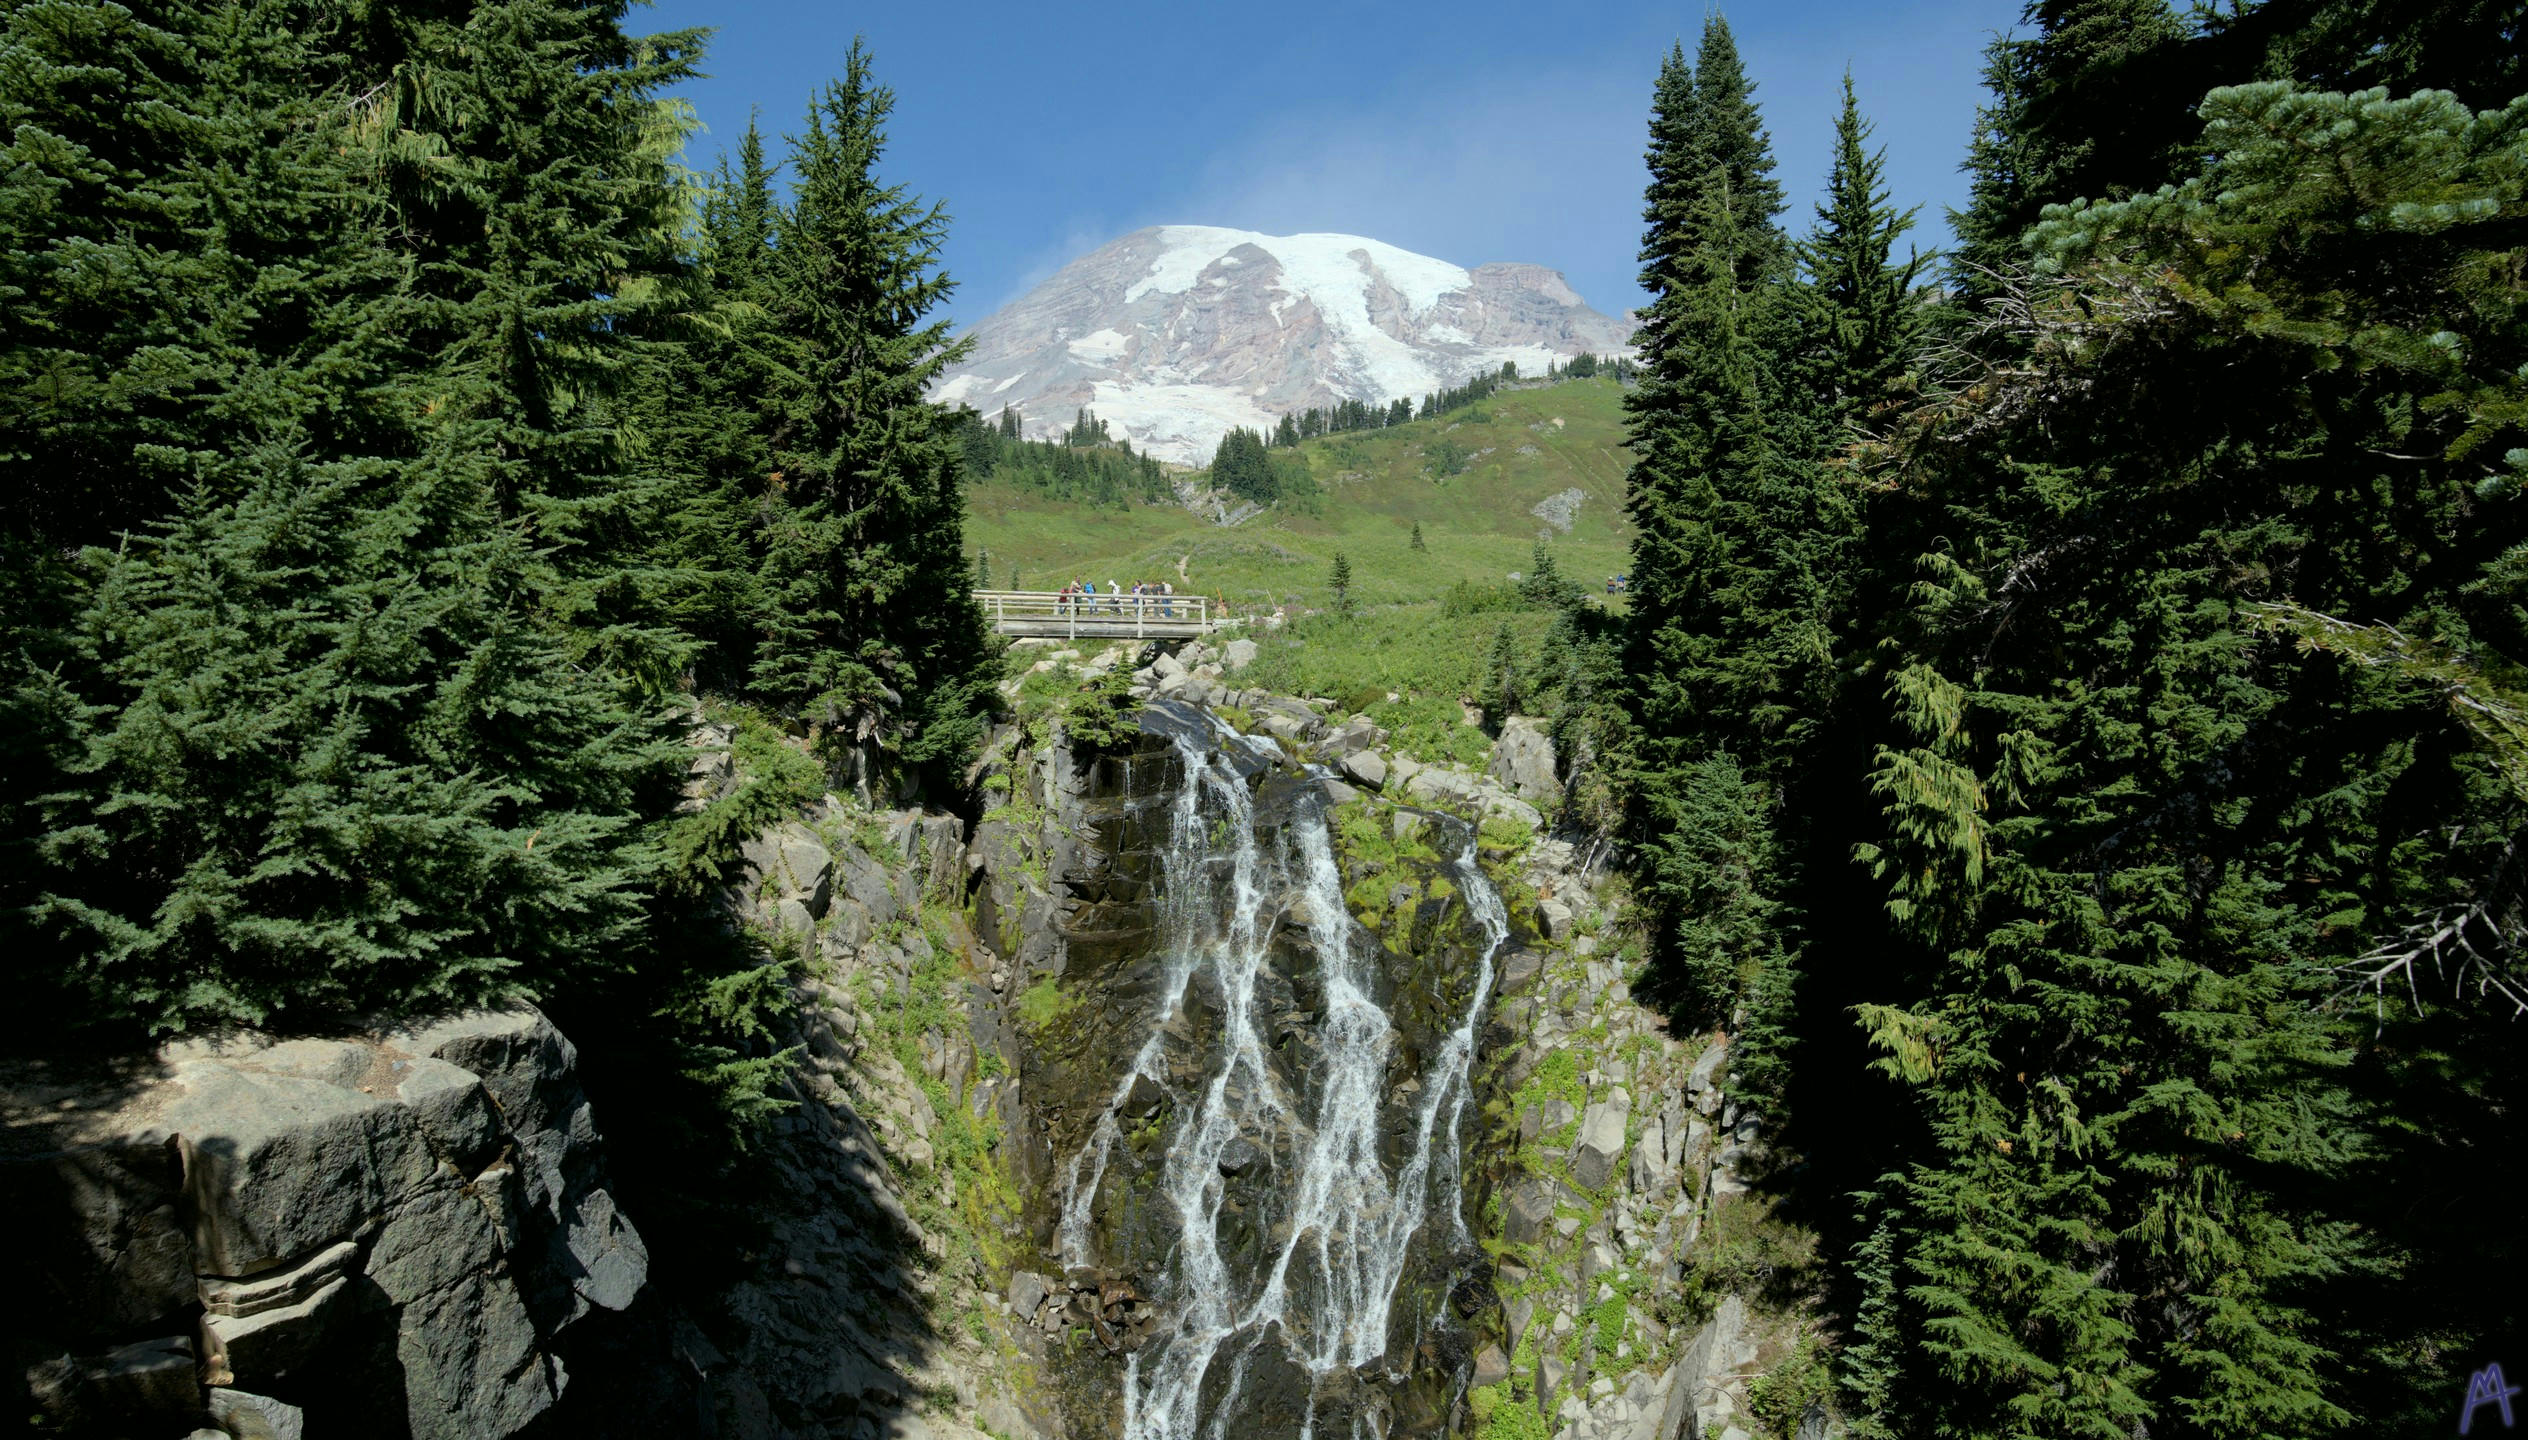 Green trees and a waterfall at Rainier